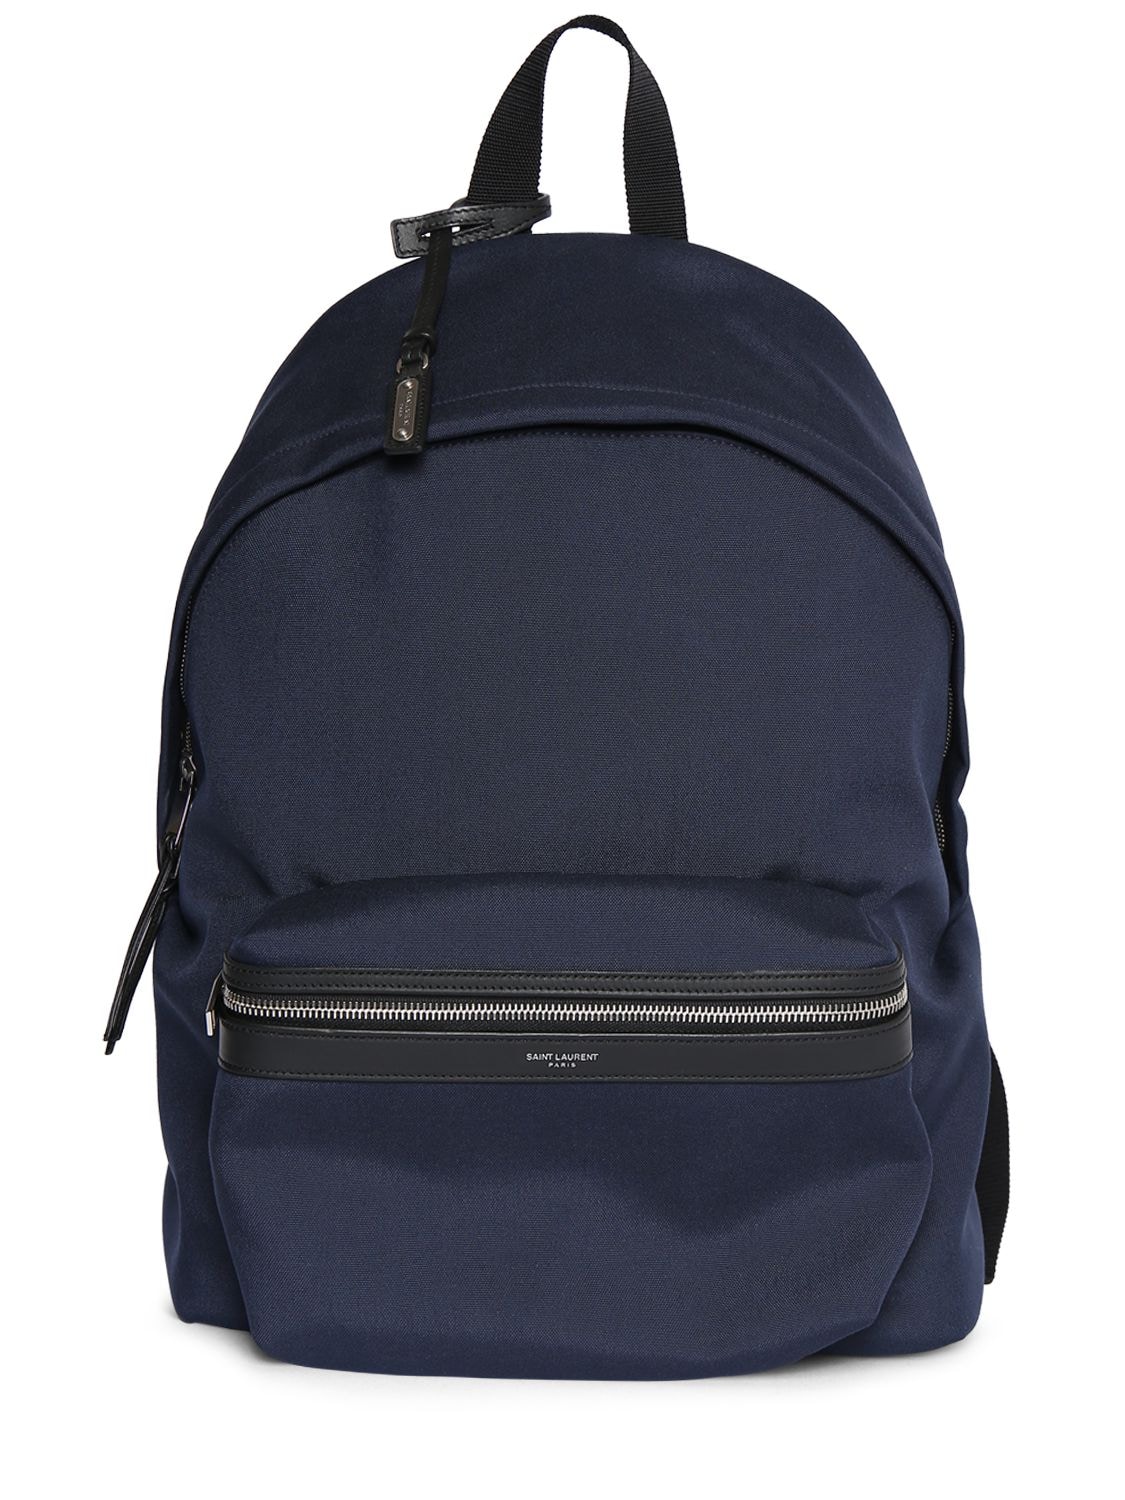 Saint Laurent City Nylon & Leather Backpack In Midnight Blue